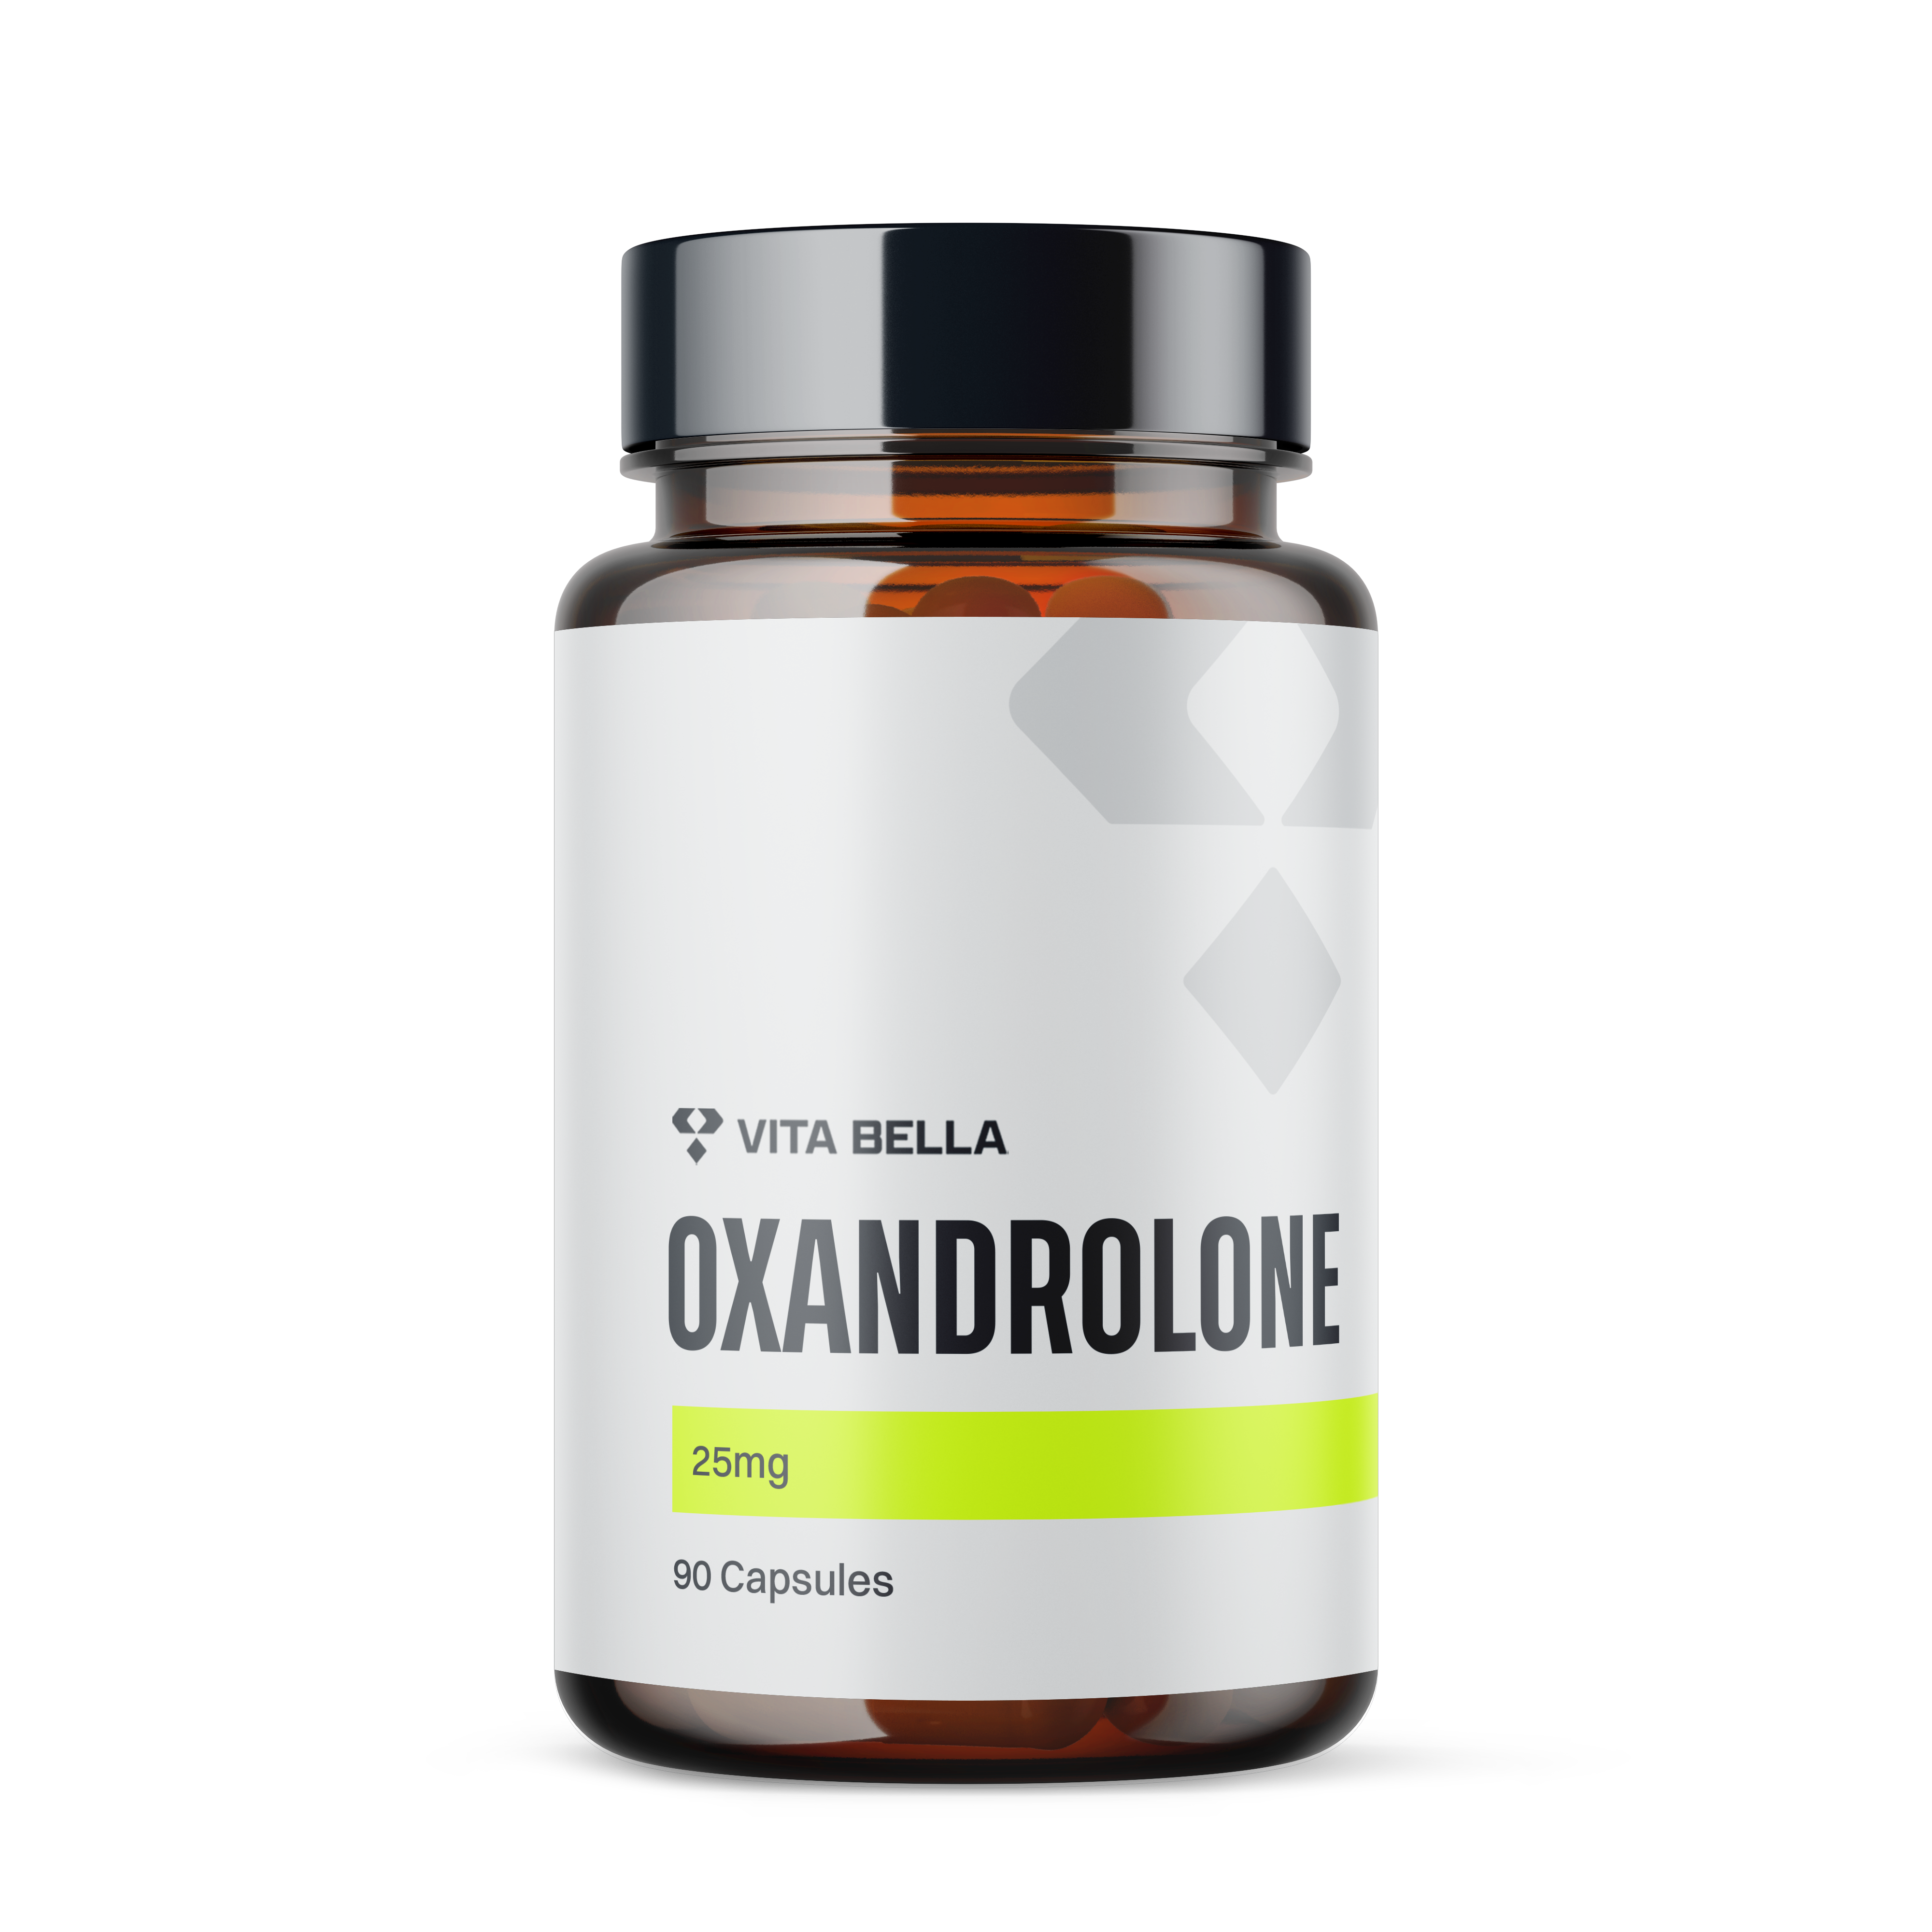 Oxandrolone capsules